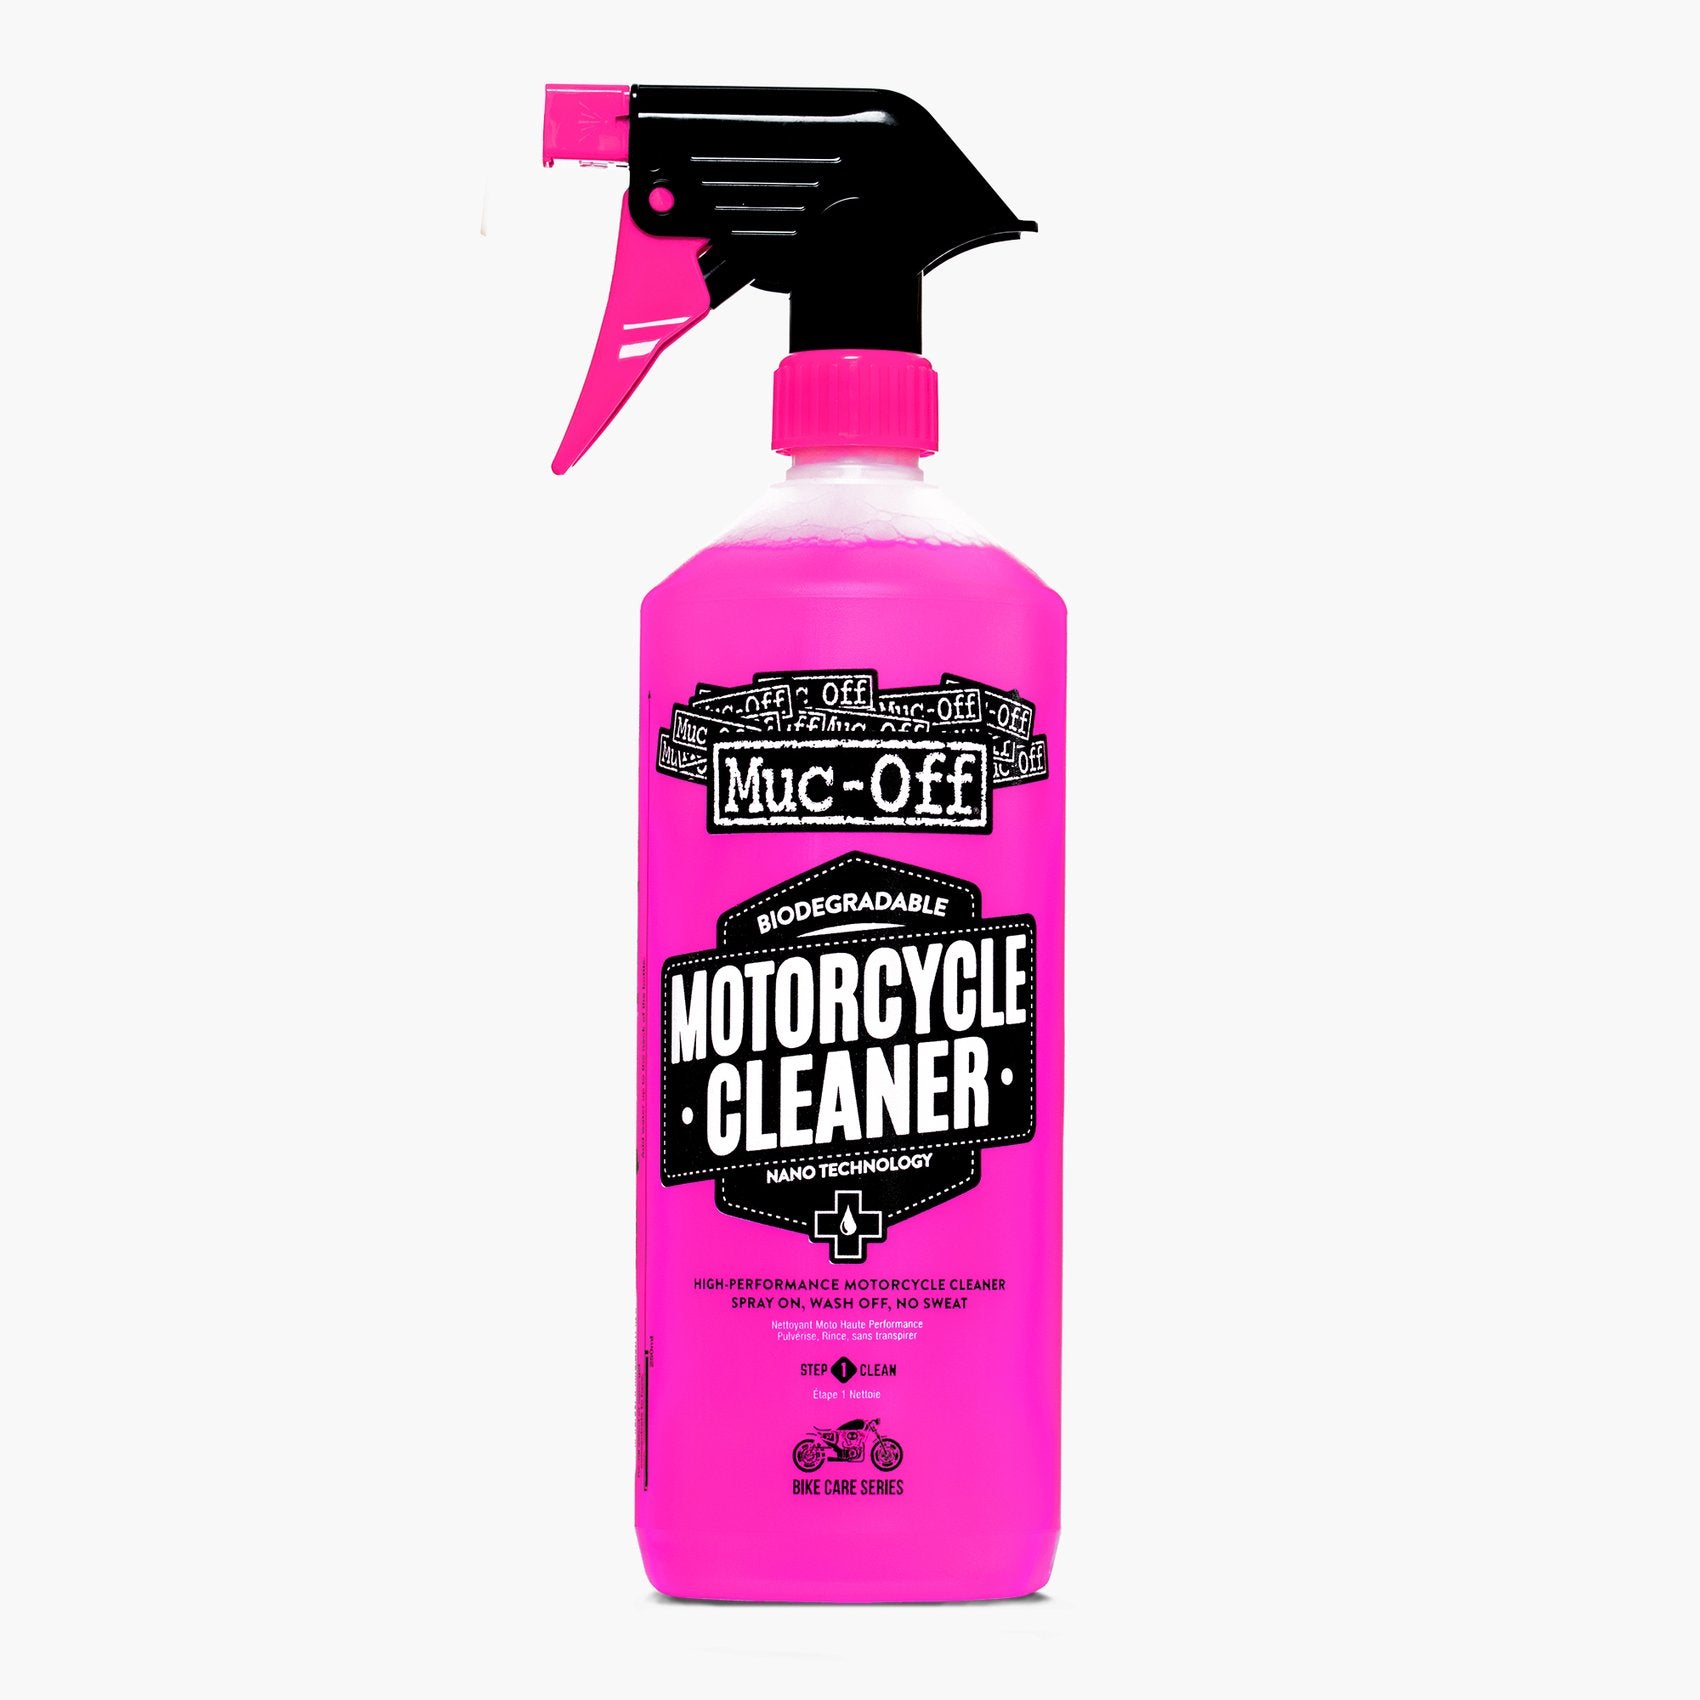 Muc-Off Powersports Dirt Bucket Cleaning Kit - Sixstar Racing